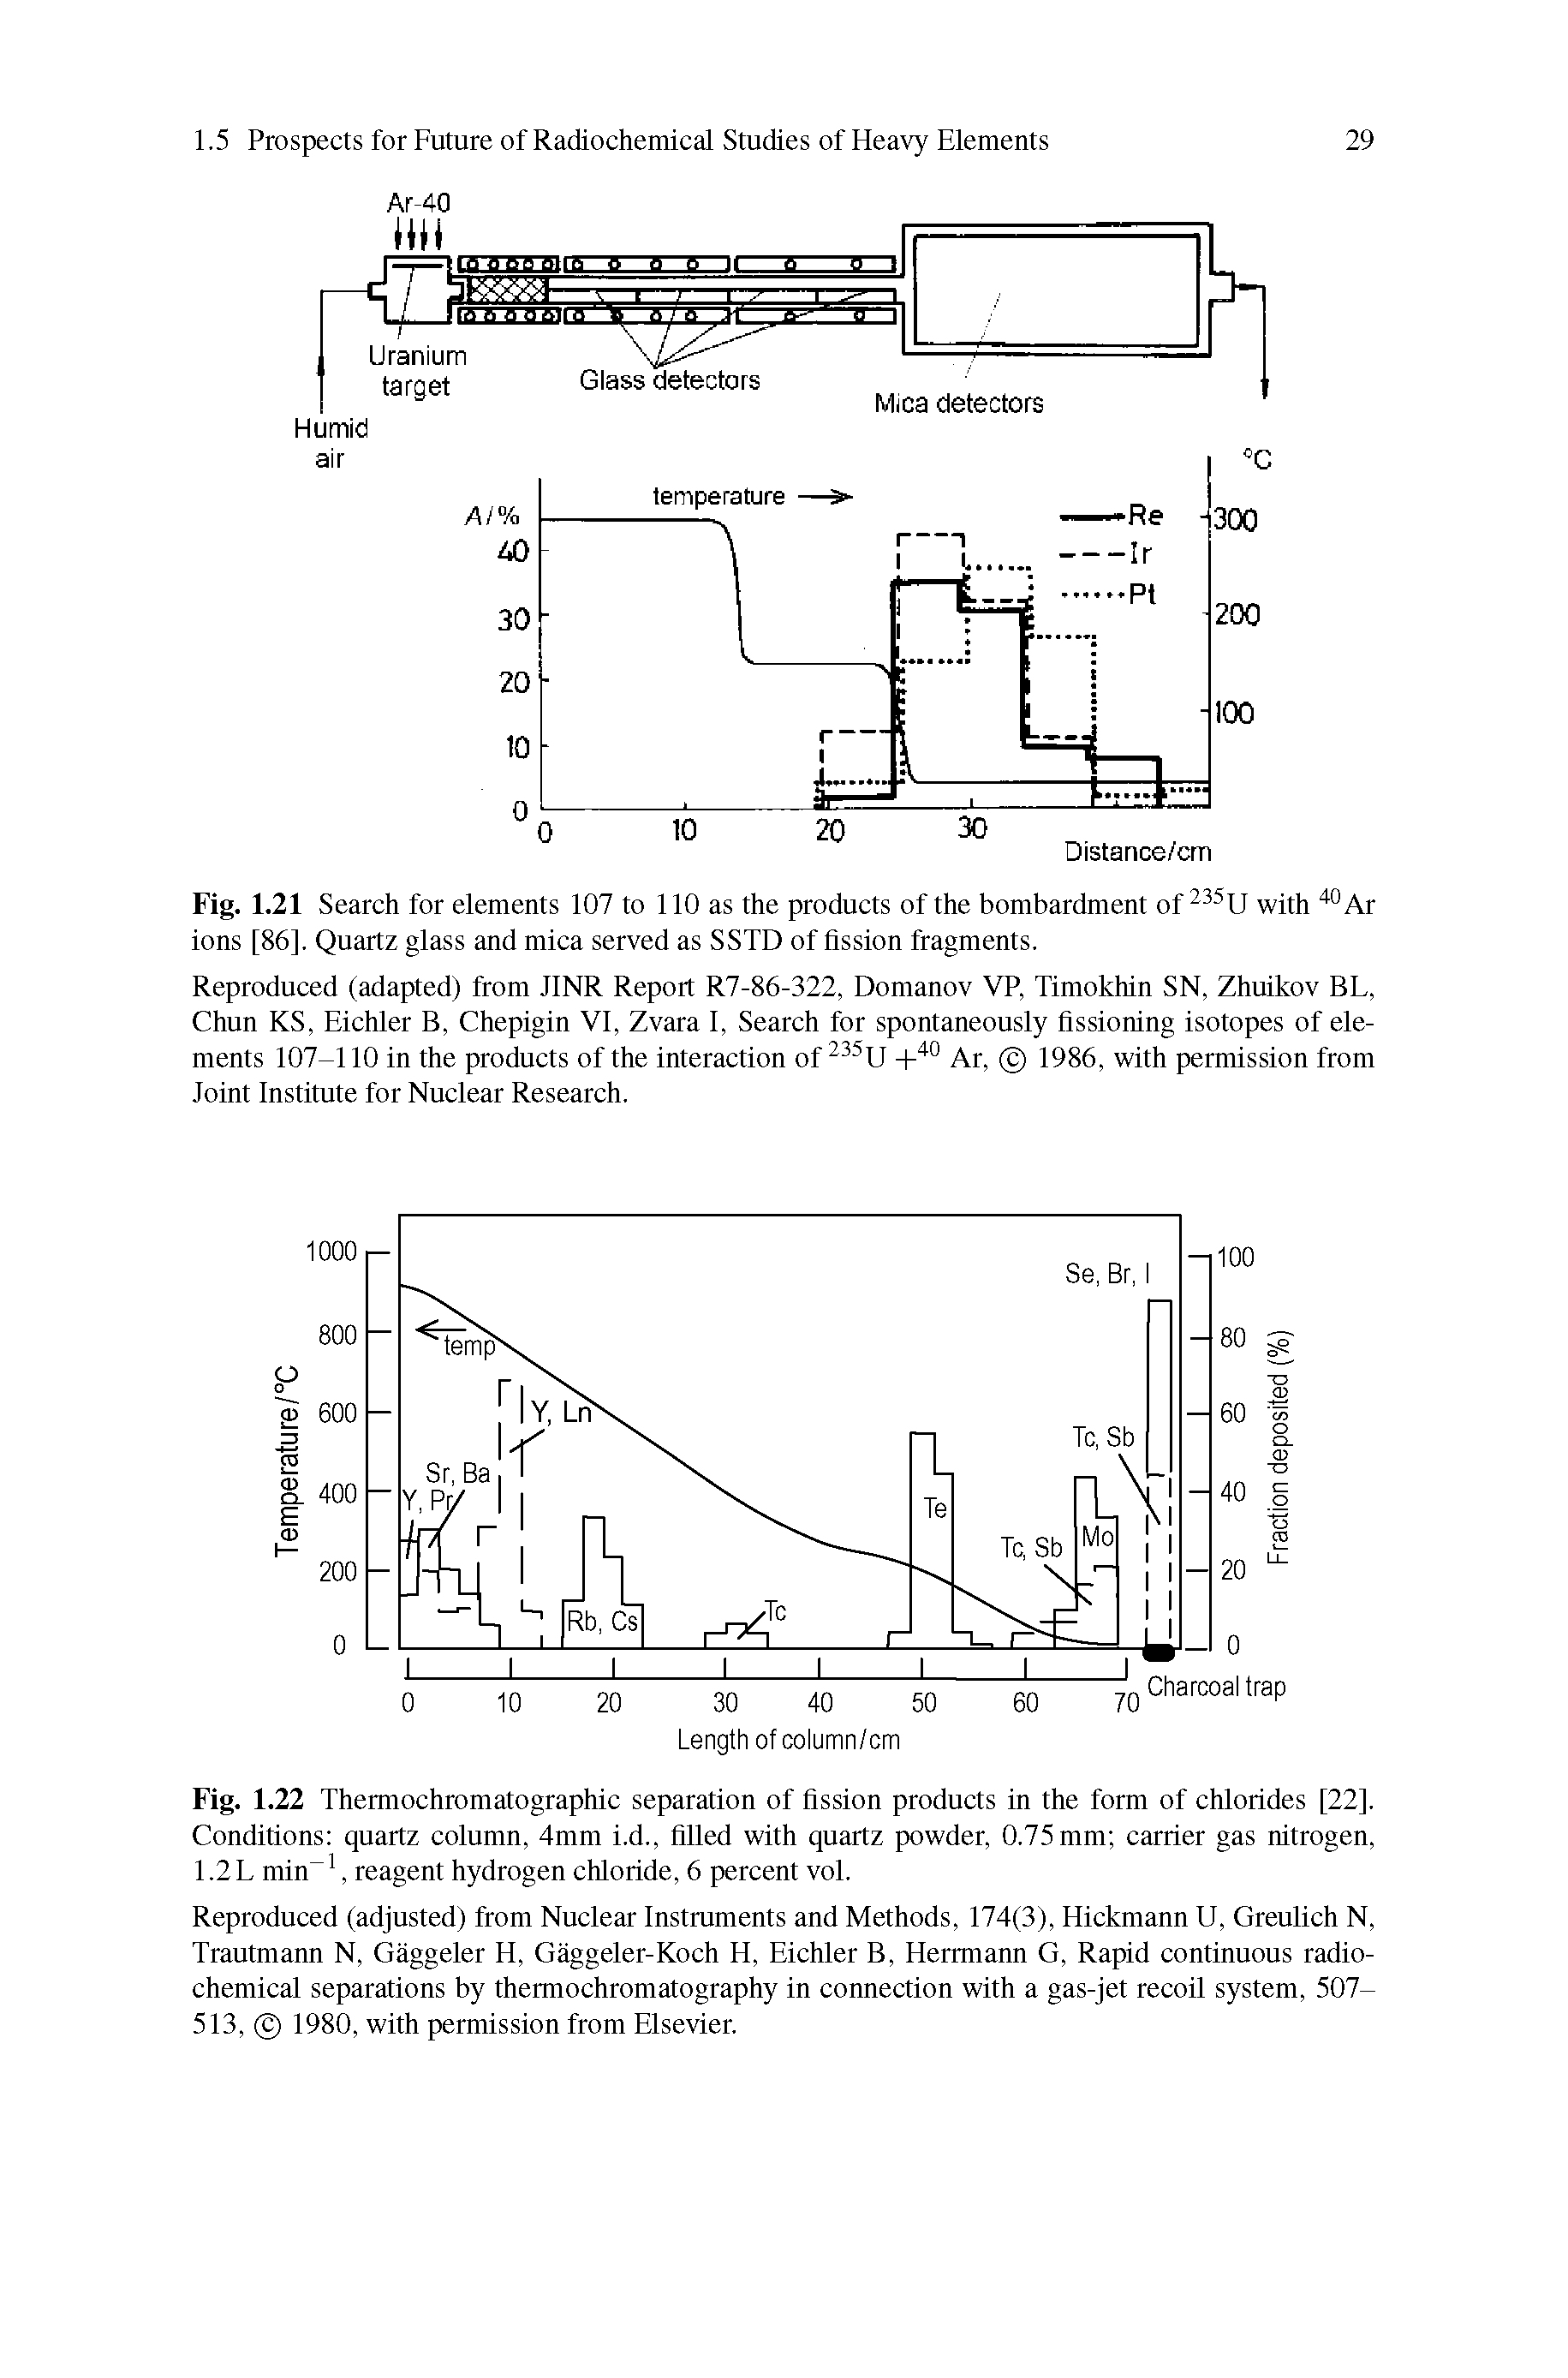 Fig. 1.22 Thermochromatographic separation of fission products in the form of chlorides [22], Conditions quartz column, 4mm i.d., filled with quartz powder, 0.75 mm carrier gas nitrogen, 1.2L min-1, reagent hydrogen chloride, 6 percent vol.